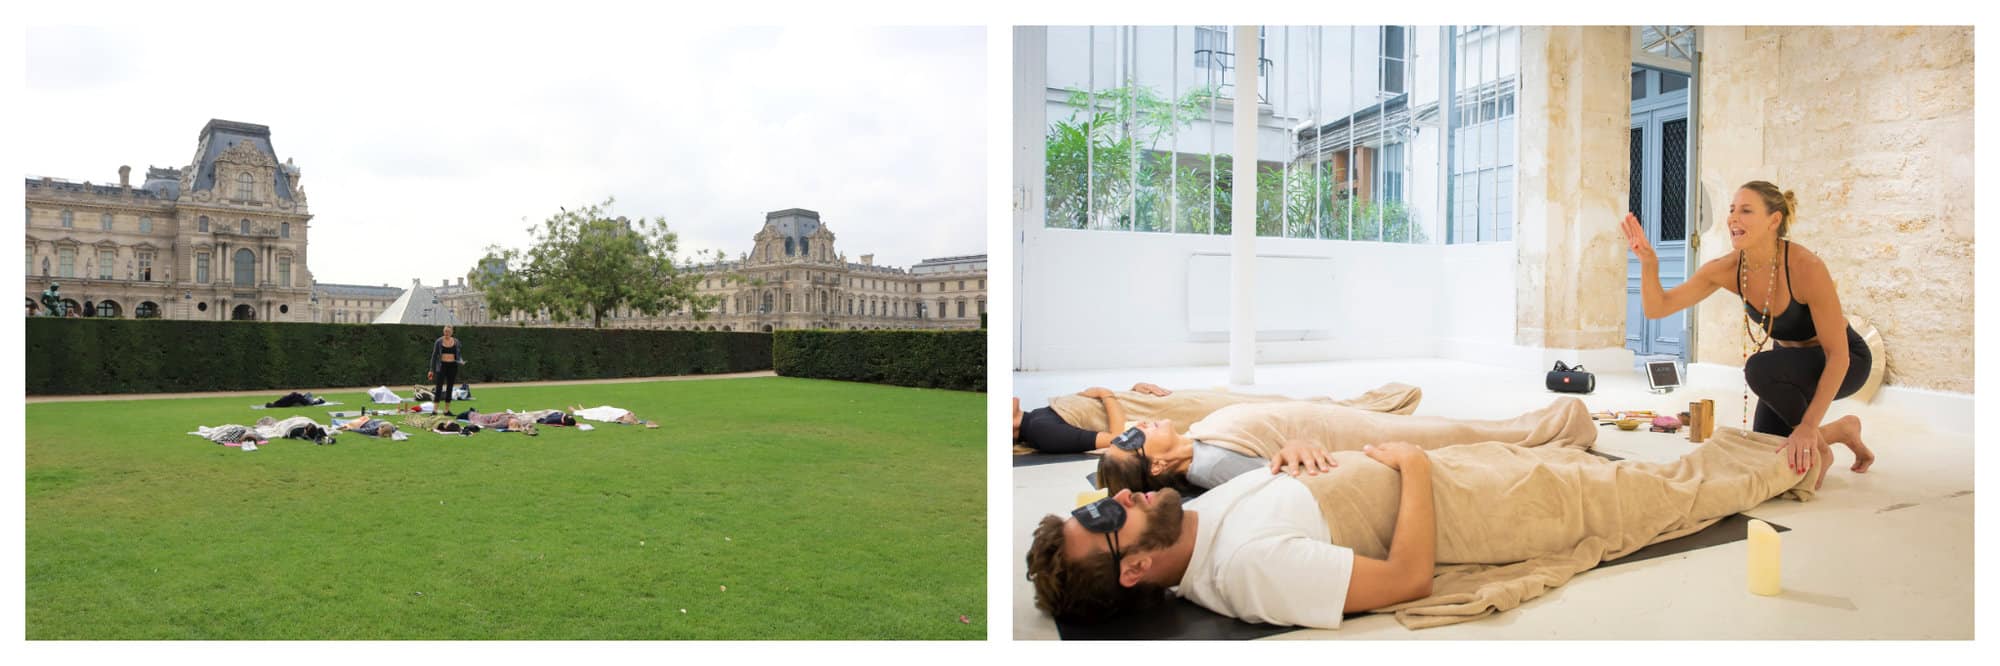 Left: An outdoor yoga class in front of the Tuilleries Garden with 7 participants and their teacher. Right: A yoga class in a studio with 3 participants lying down and their teacher instructing them.